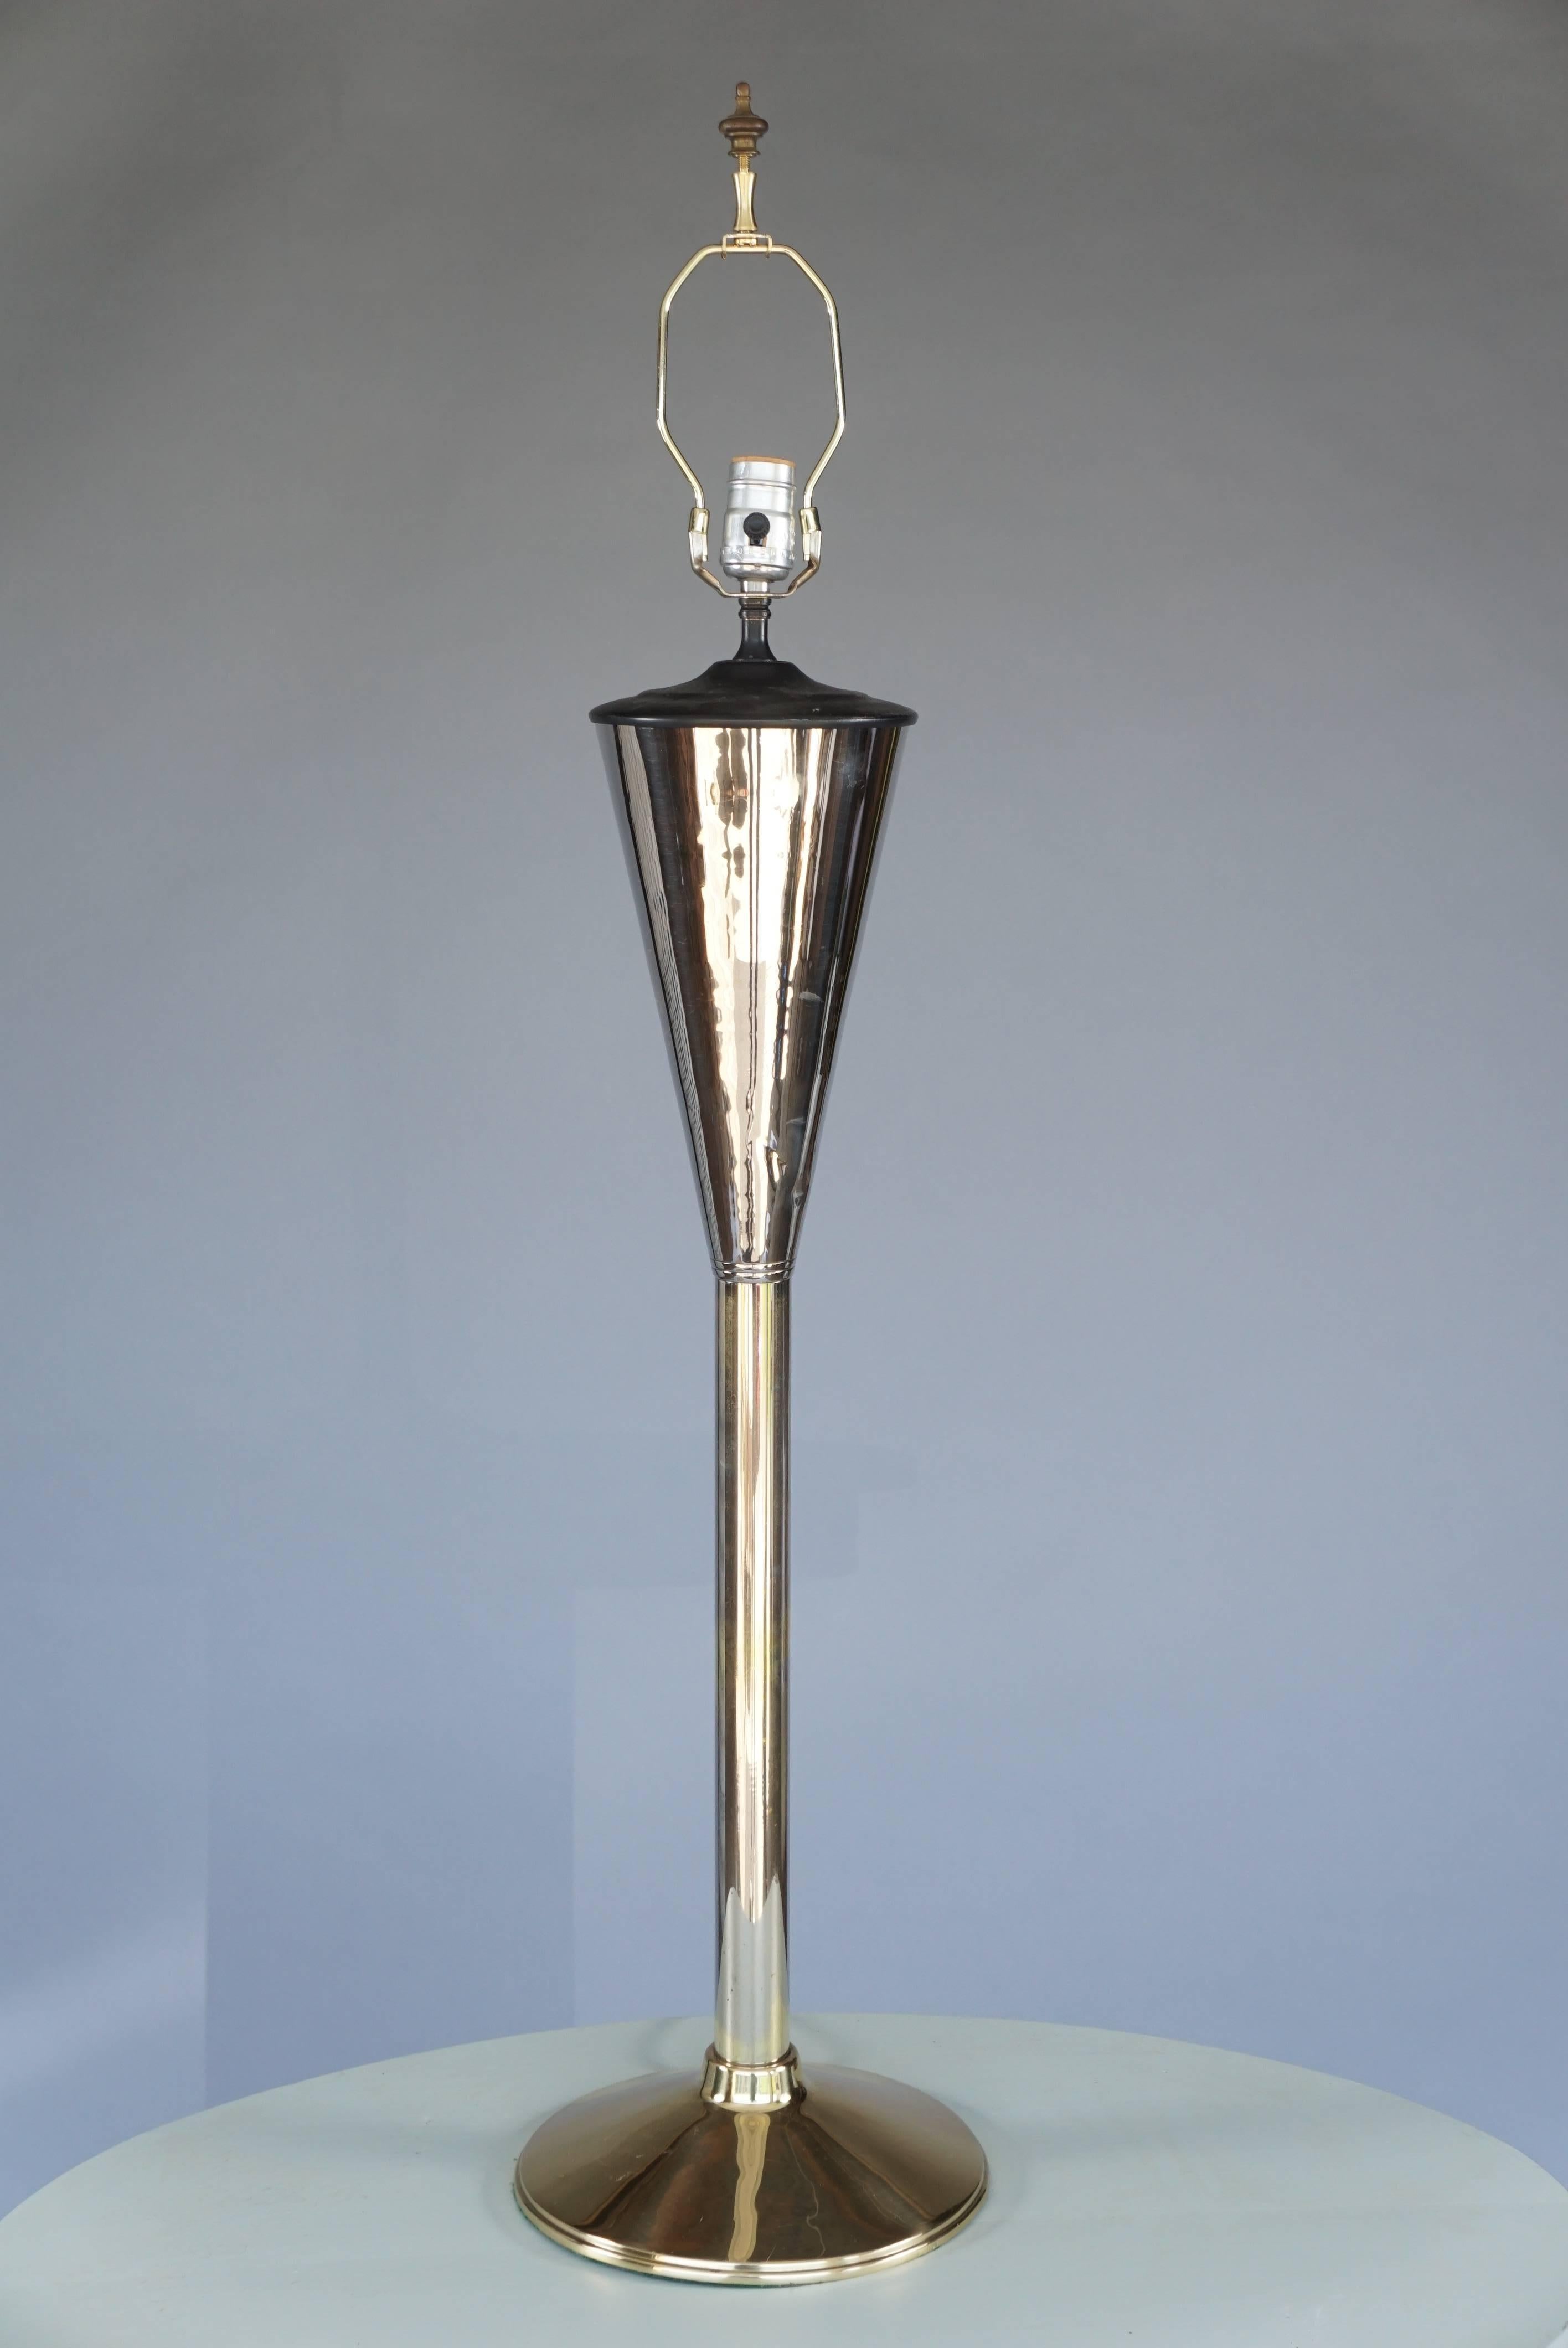 Beautifully elongated table lamps brass and polished metals
handcrafted. One of a kind.